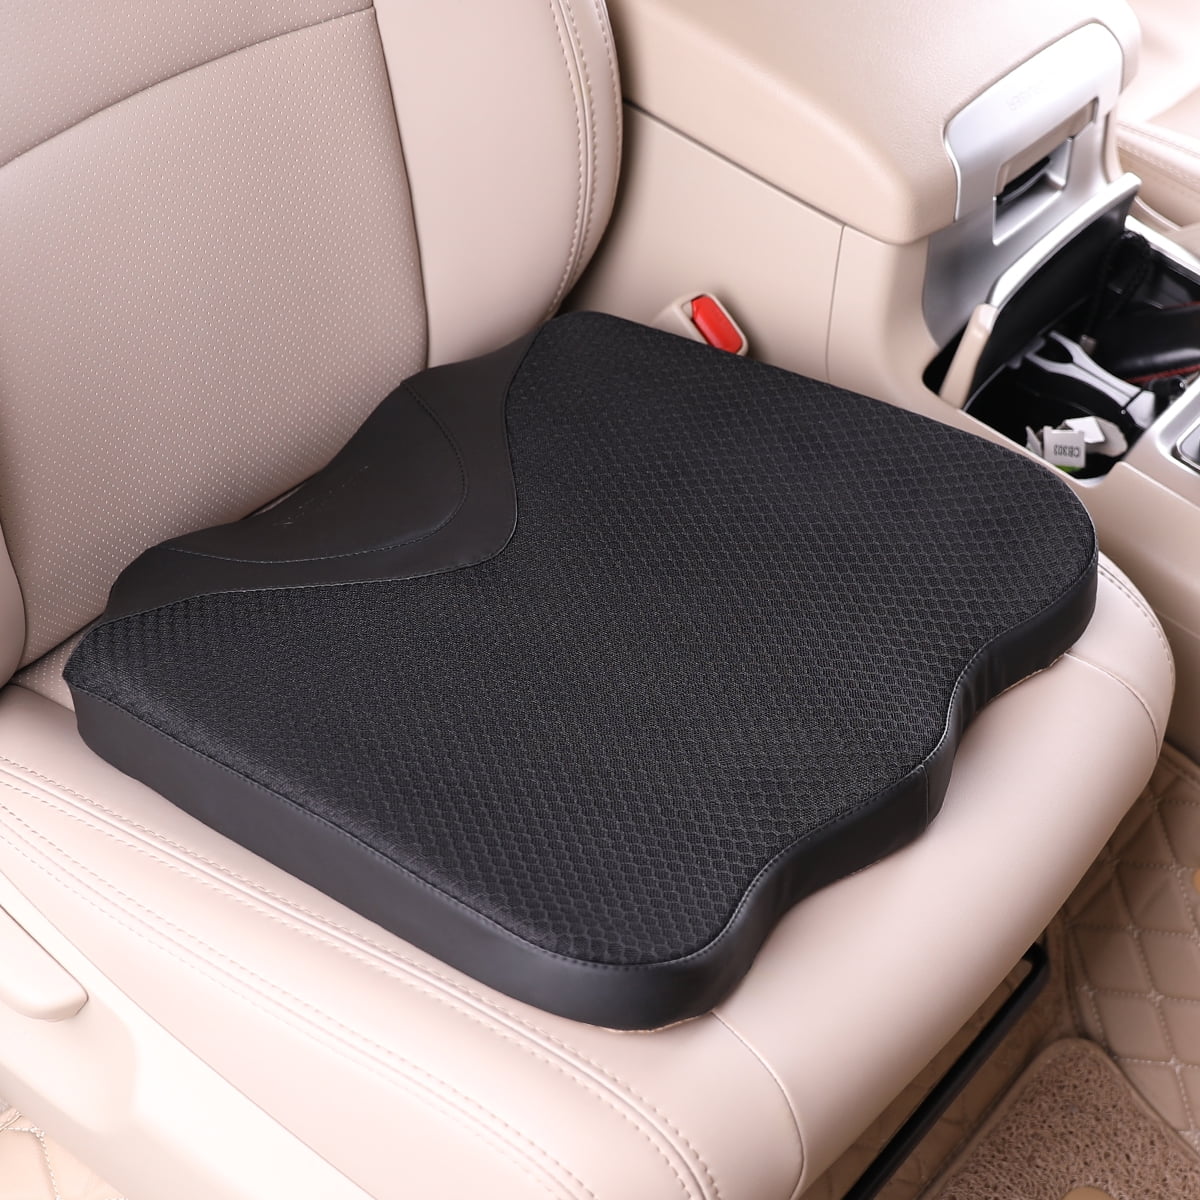 KINGLETING Lumbar Support Pillow for Car, One Piece Design of Memory Foam  Lumbar Cushion, Back Support Cushion Universal Fit for Car, SUV, Truck